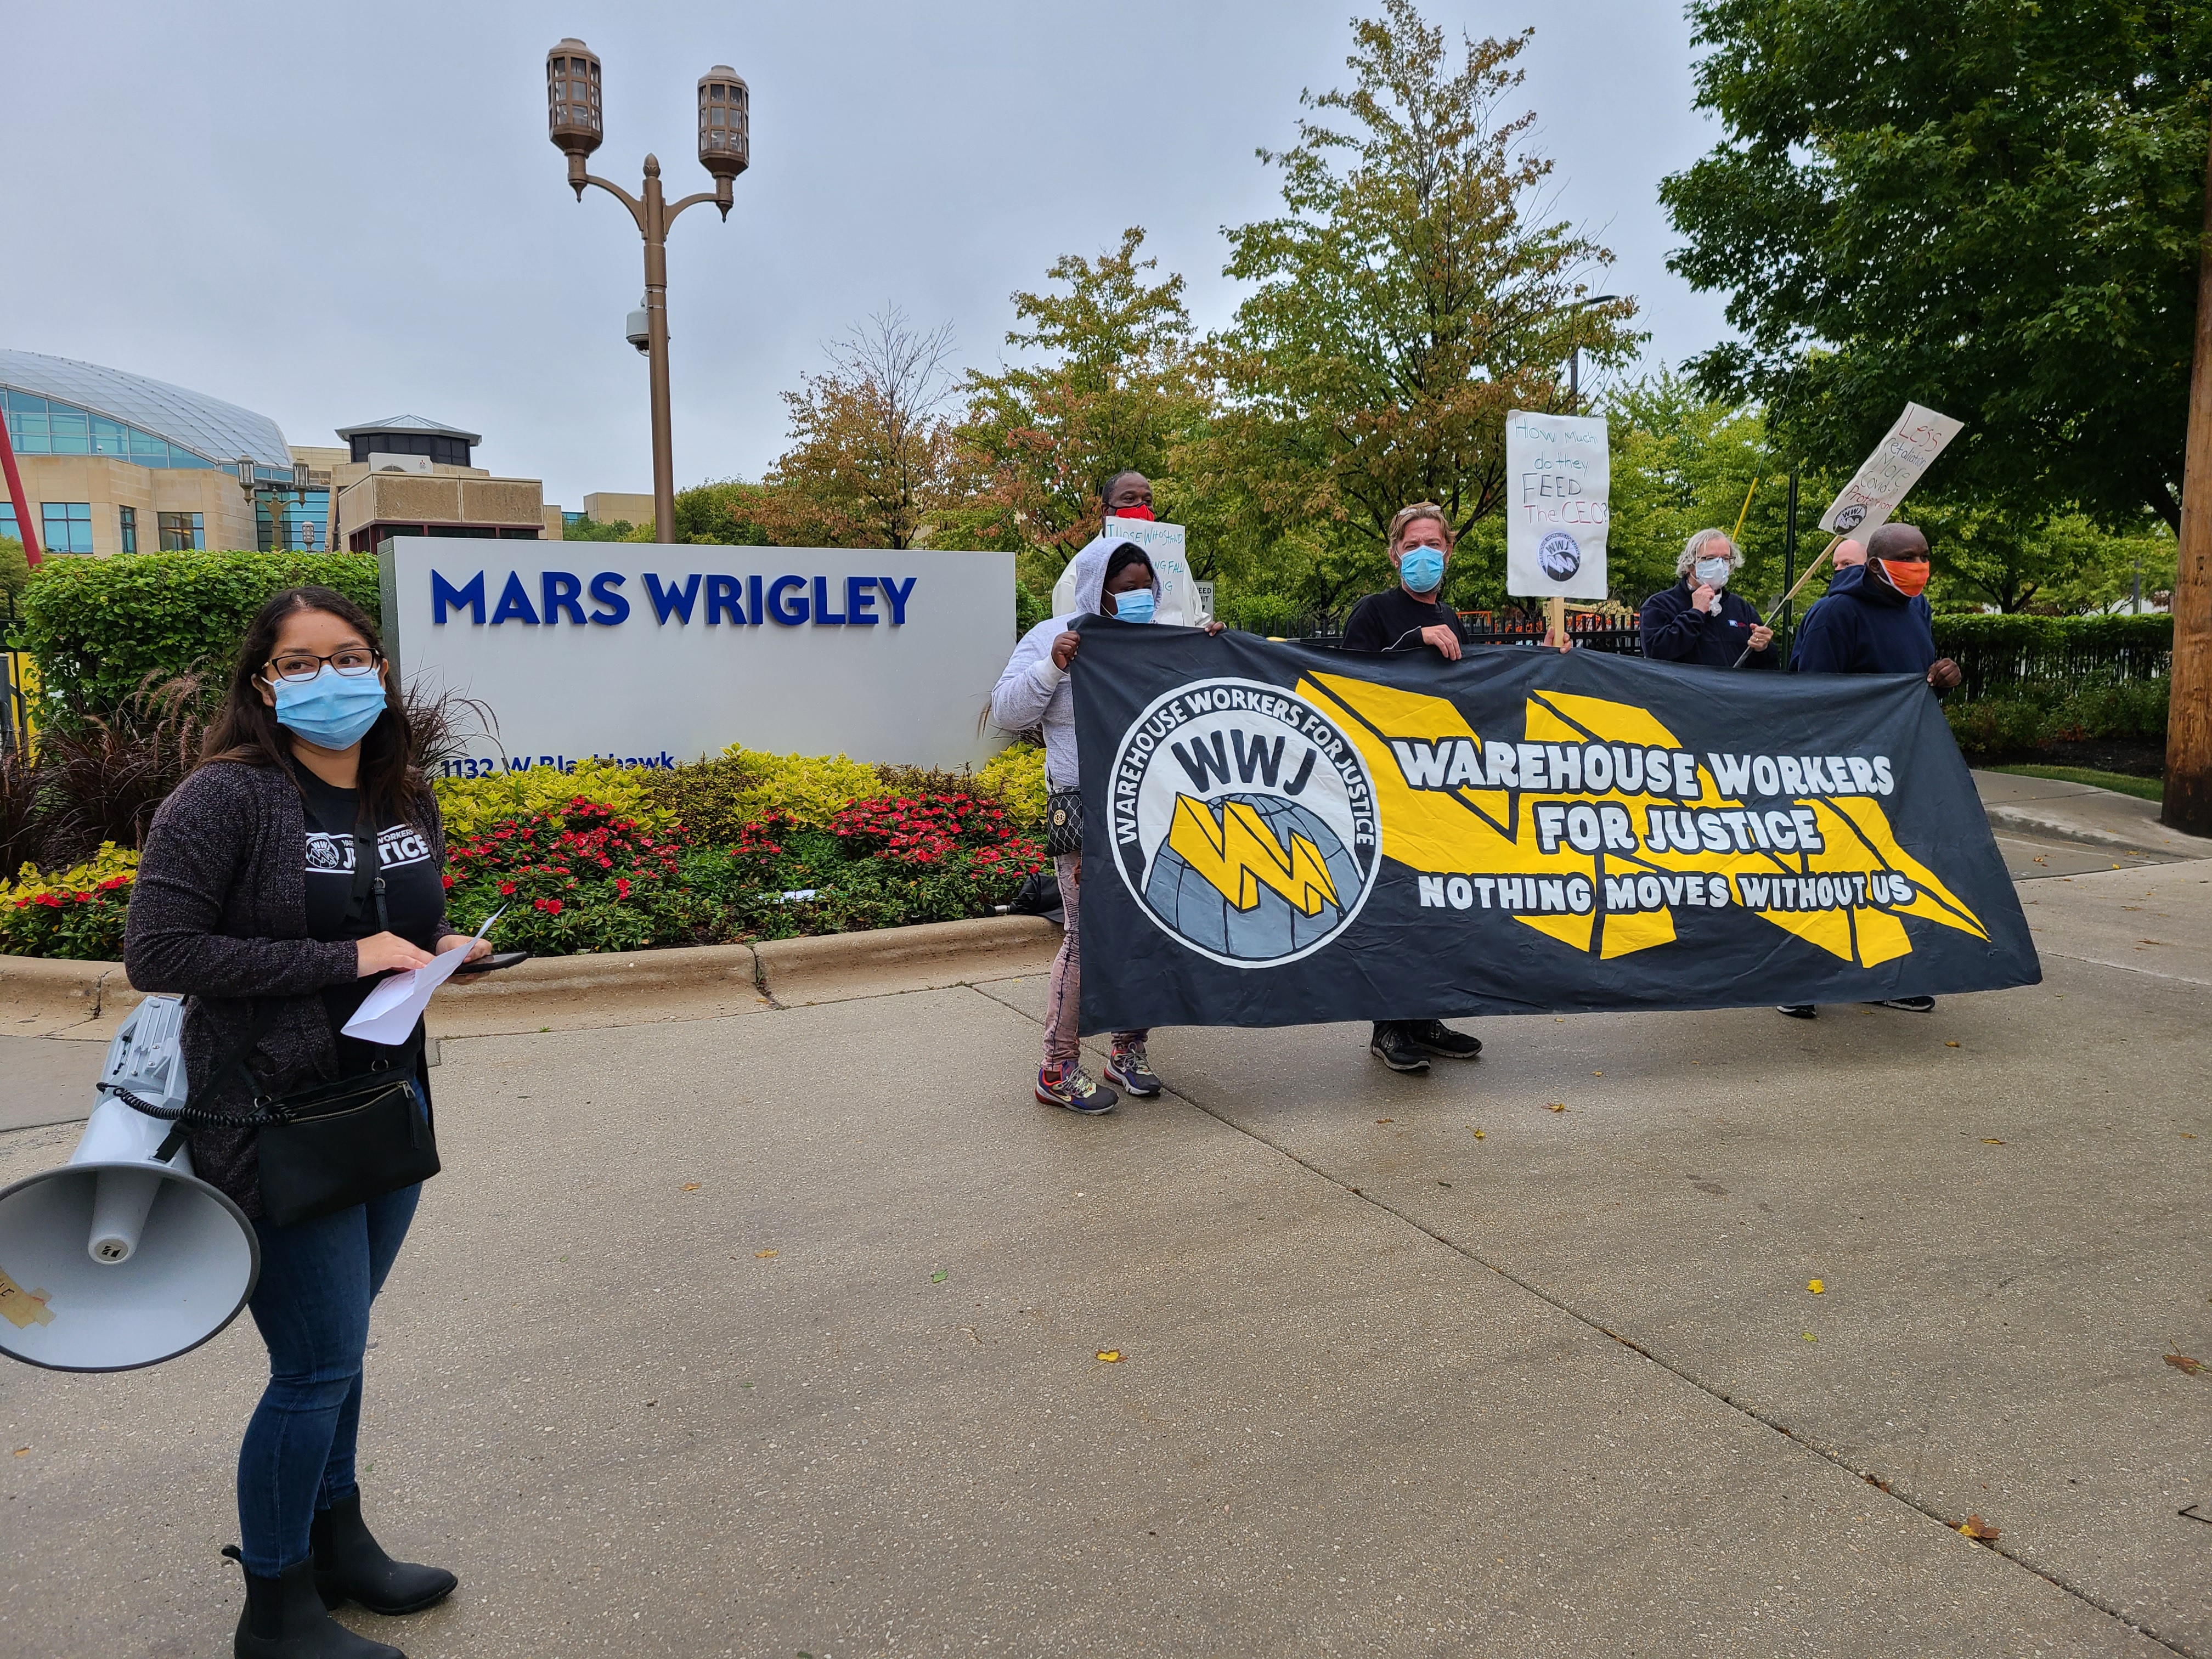 Joliet Warehouse Workers Demand Fair Treatment During Pandemic The Times Weekly Community Newspaper In Chicagoland Metropolitan Area